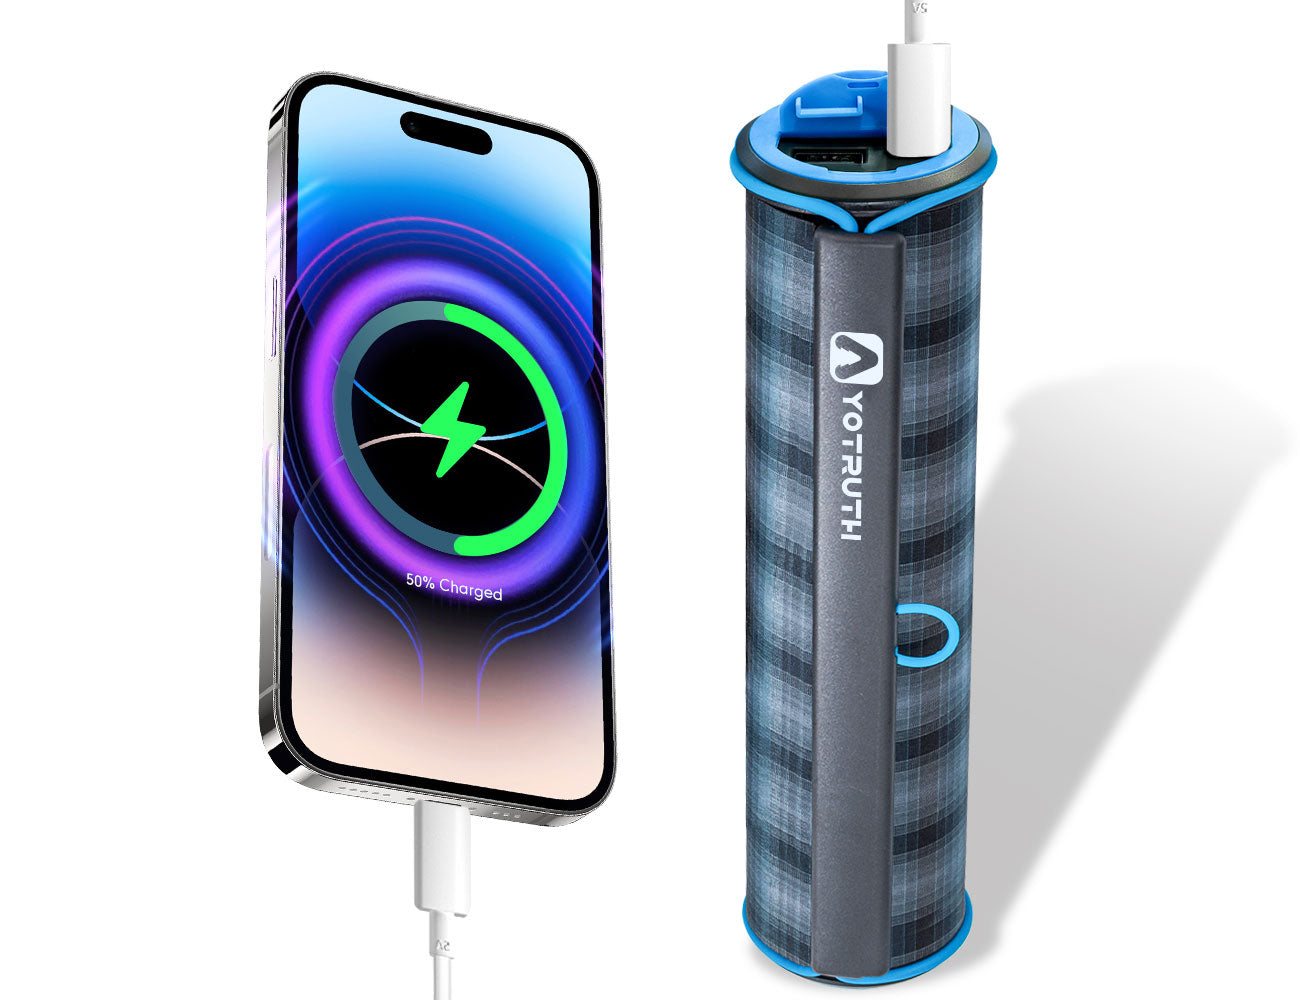 Poster of Yotruth XR-10 solar charger charging a phone, with the phone battery indicator showing 50%